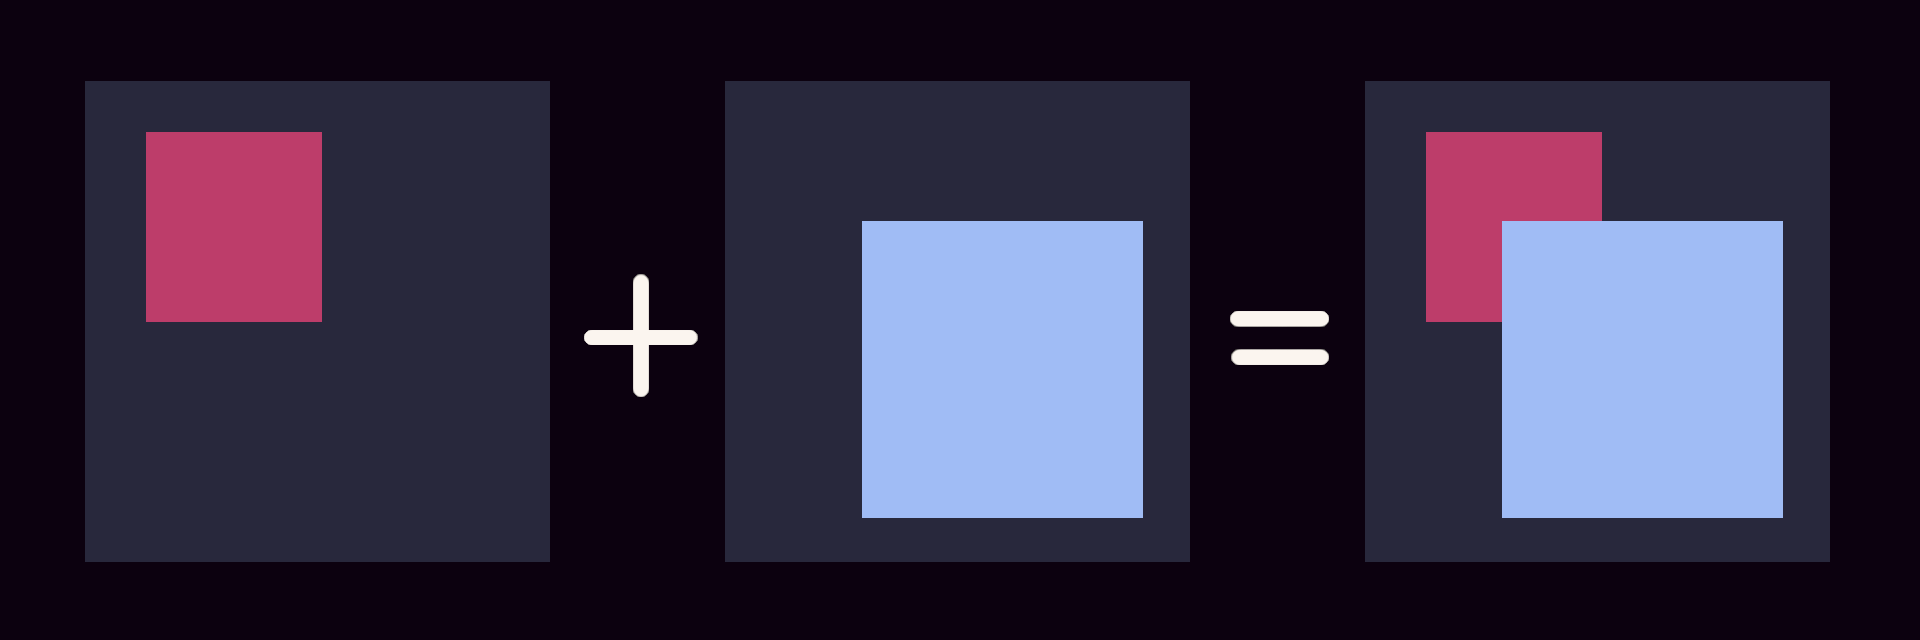 A red square appears in the first layer. A blue square appears in the second. When combined, the blue square obscures parts of the red square.